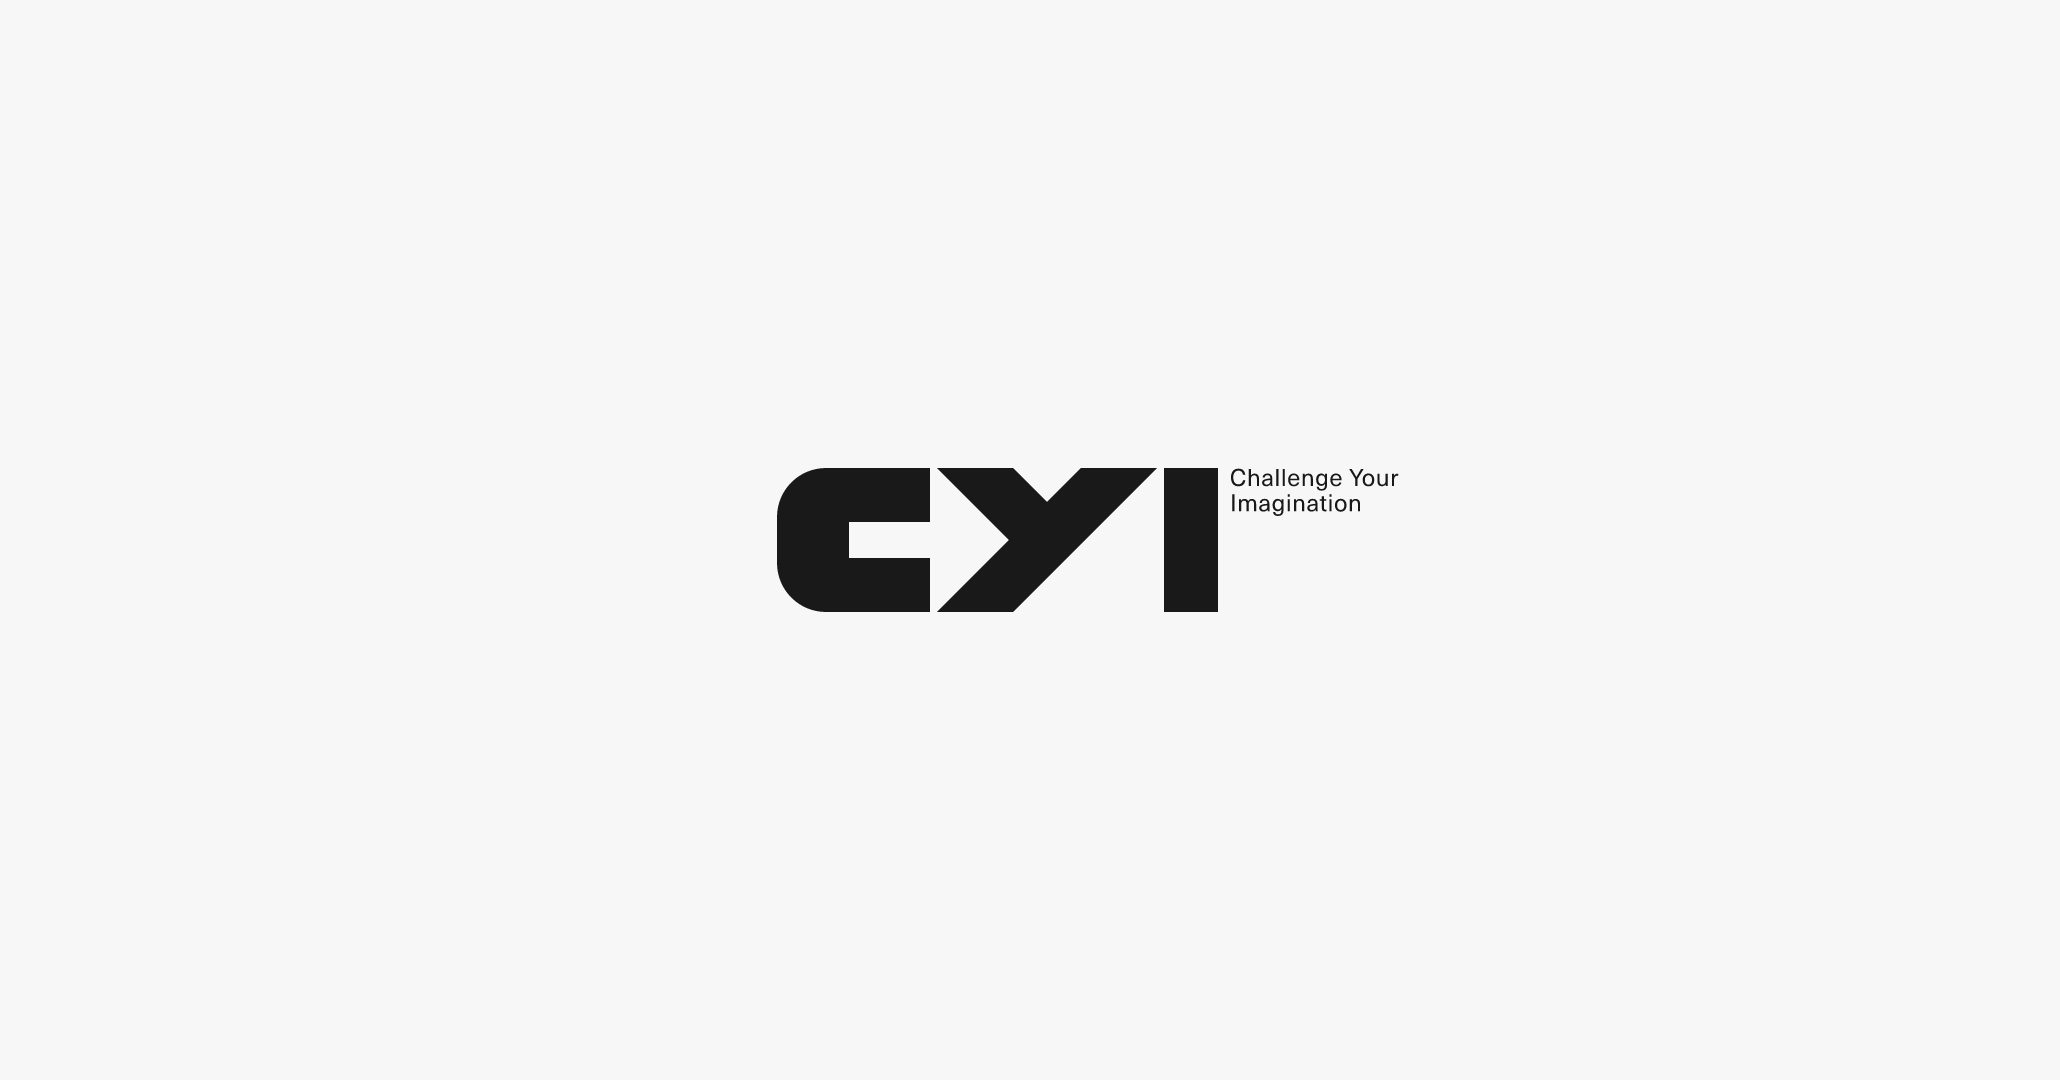 Challenge Your Imagination logo design concept: CYI in block letters, with an arrow in the negative space between the C and the Y